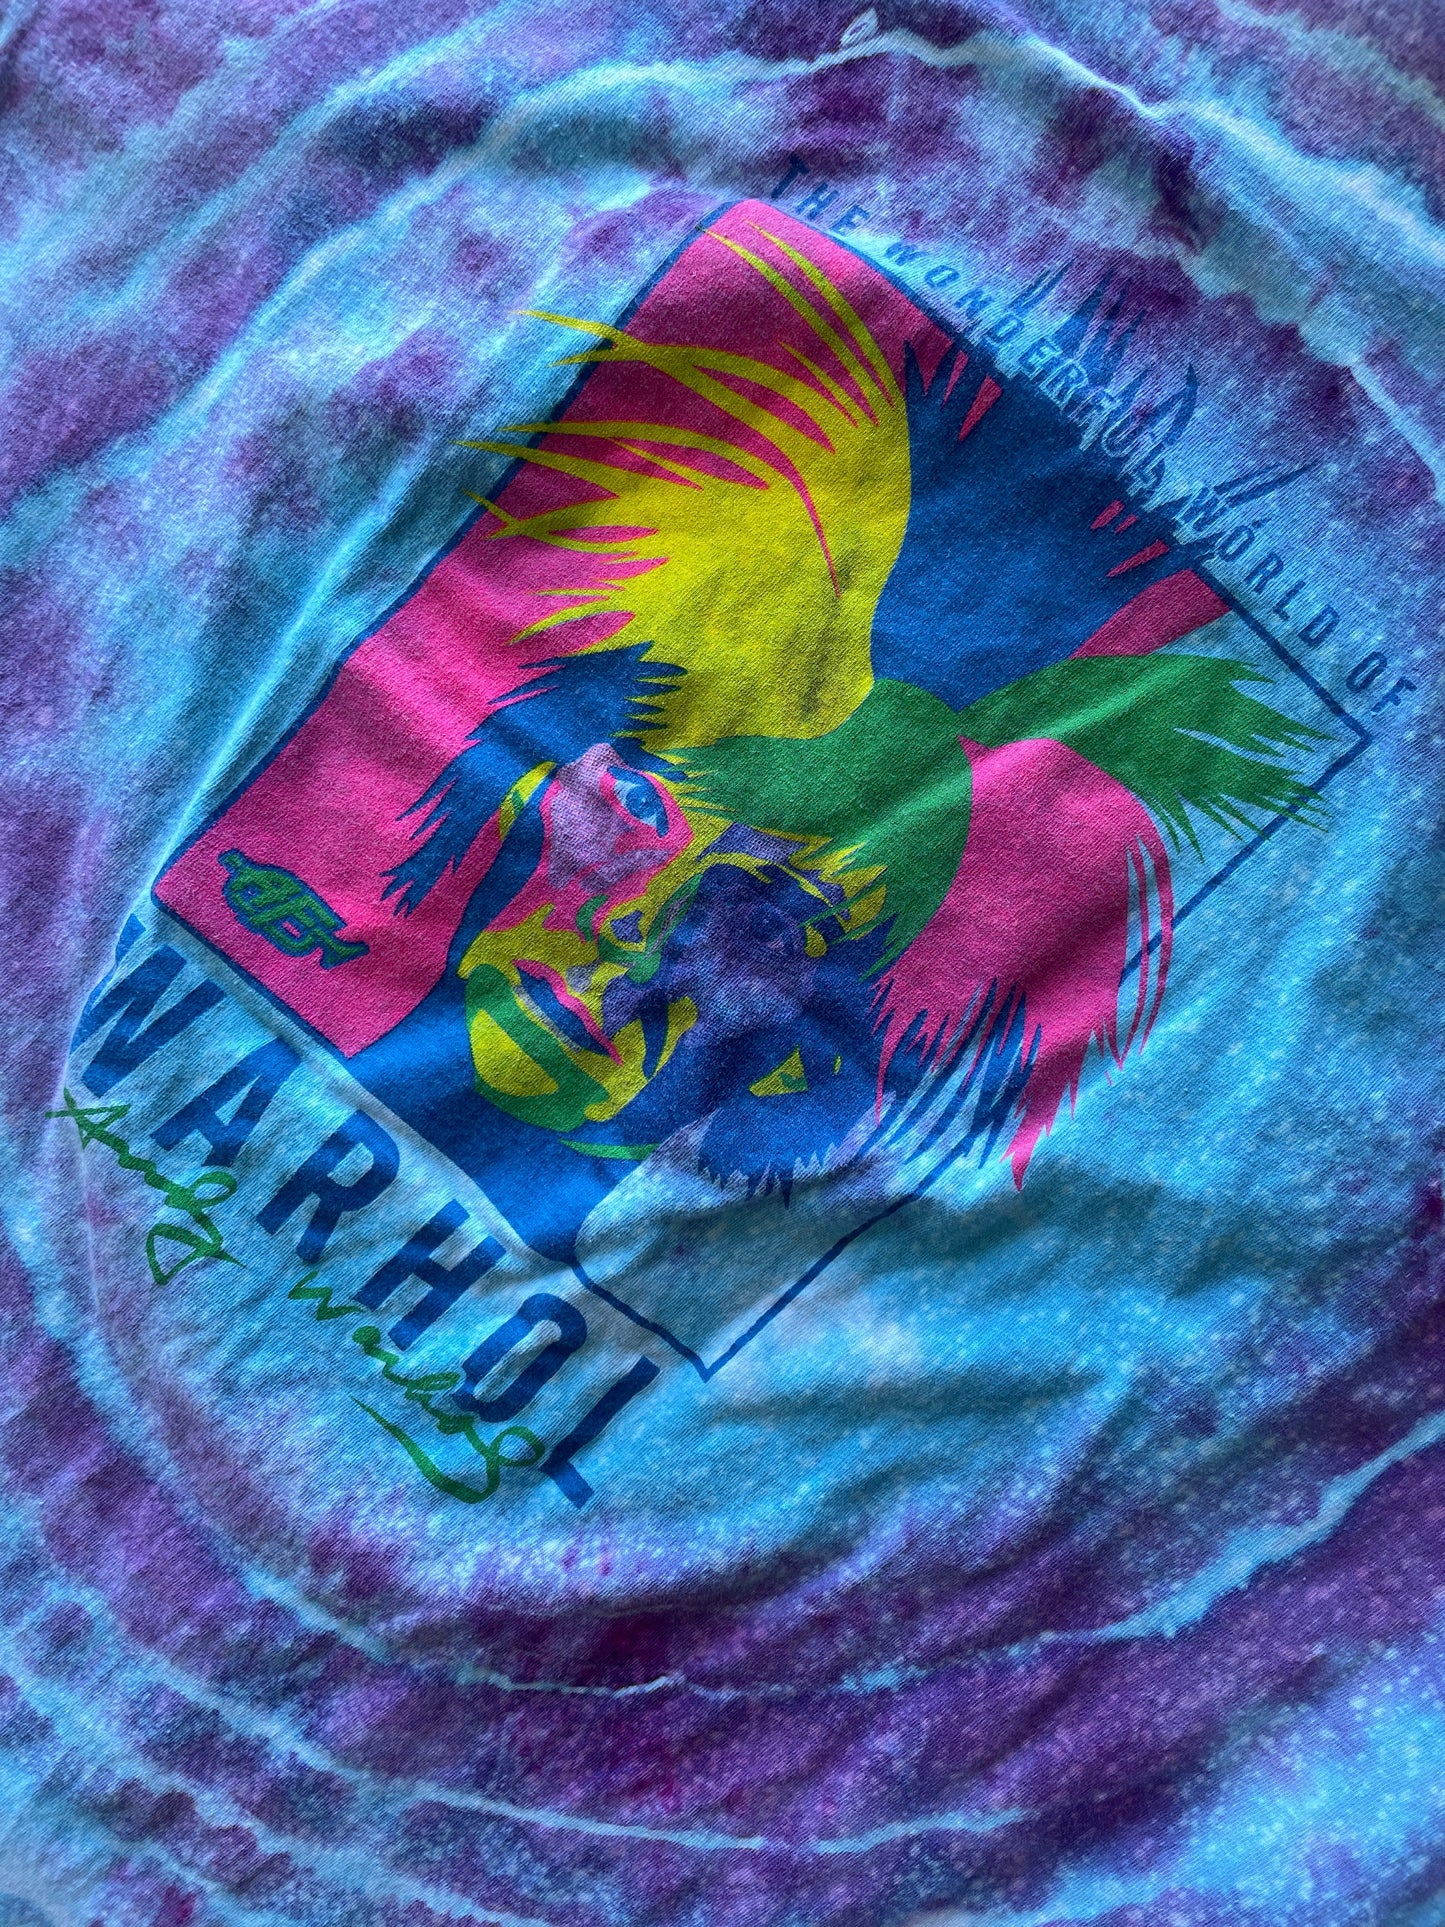 XL Men’s Wonderful World of Warhol Handmade Tie Dye Short Sleeve T-Shirt | One-Of-a-Kind Upcycled Pink and Purple Galaxy Ice Dye Geode Top